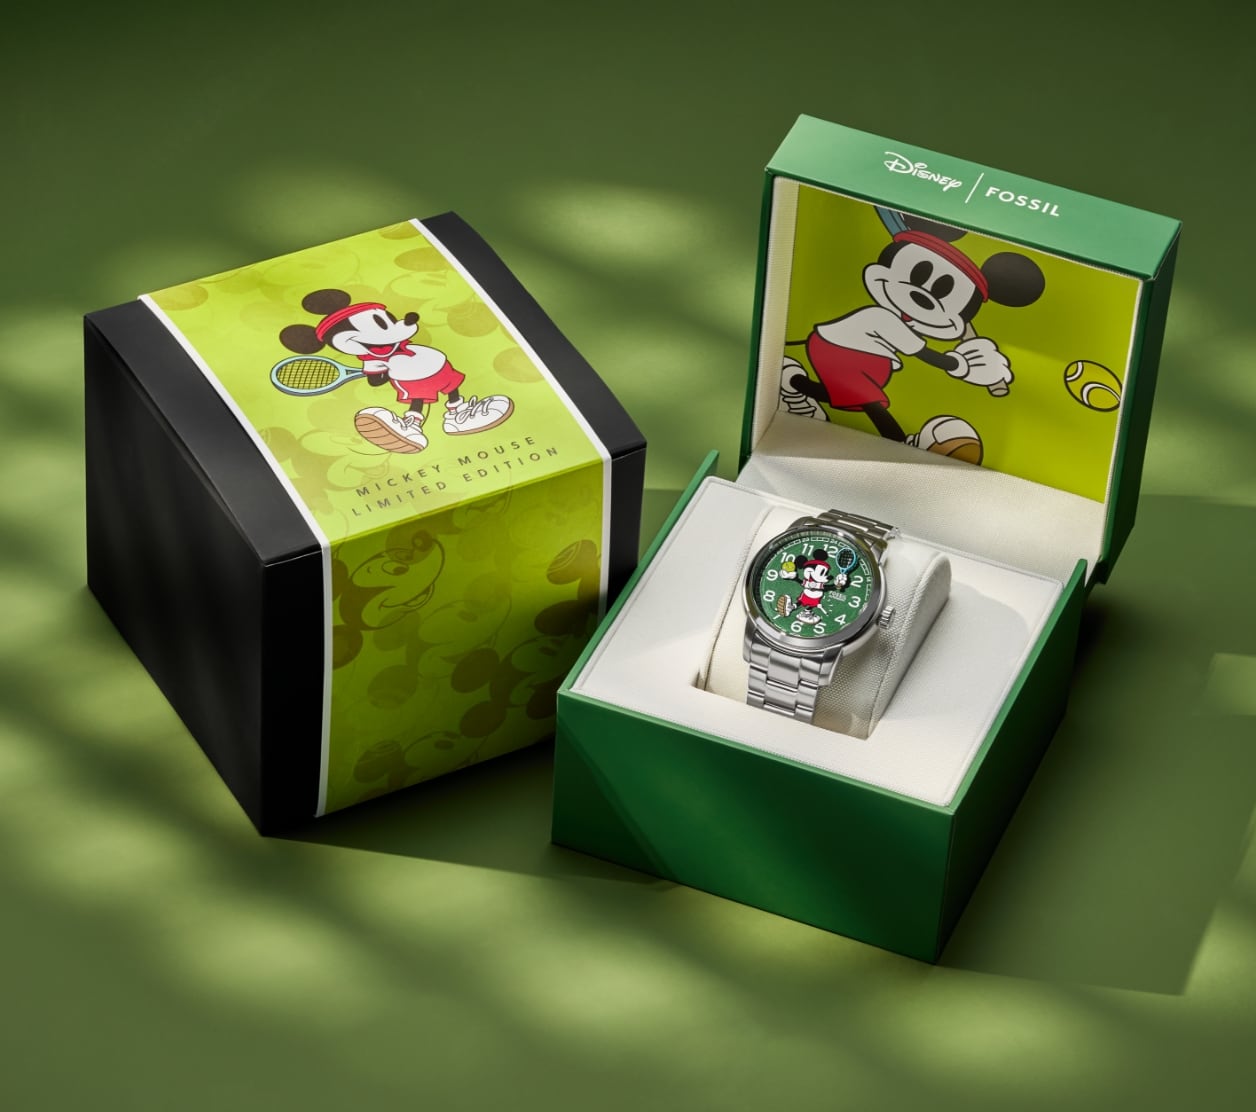 The keepsake gift box for our limited-edition Disney Mickey Mouse Tennis Watch, featuring custom Mickey Mouse graphics. On the left, the box is shown closed with a wraparound Mickey graphic. On the right, the box is shown open, revealing the watch inside and the custom Mickey graphic.